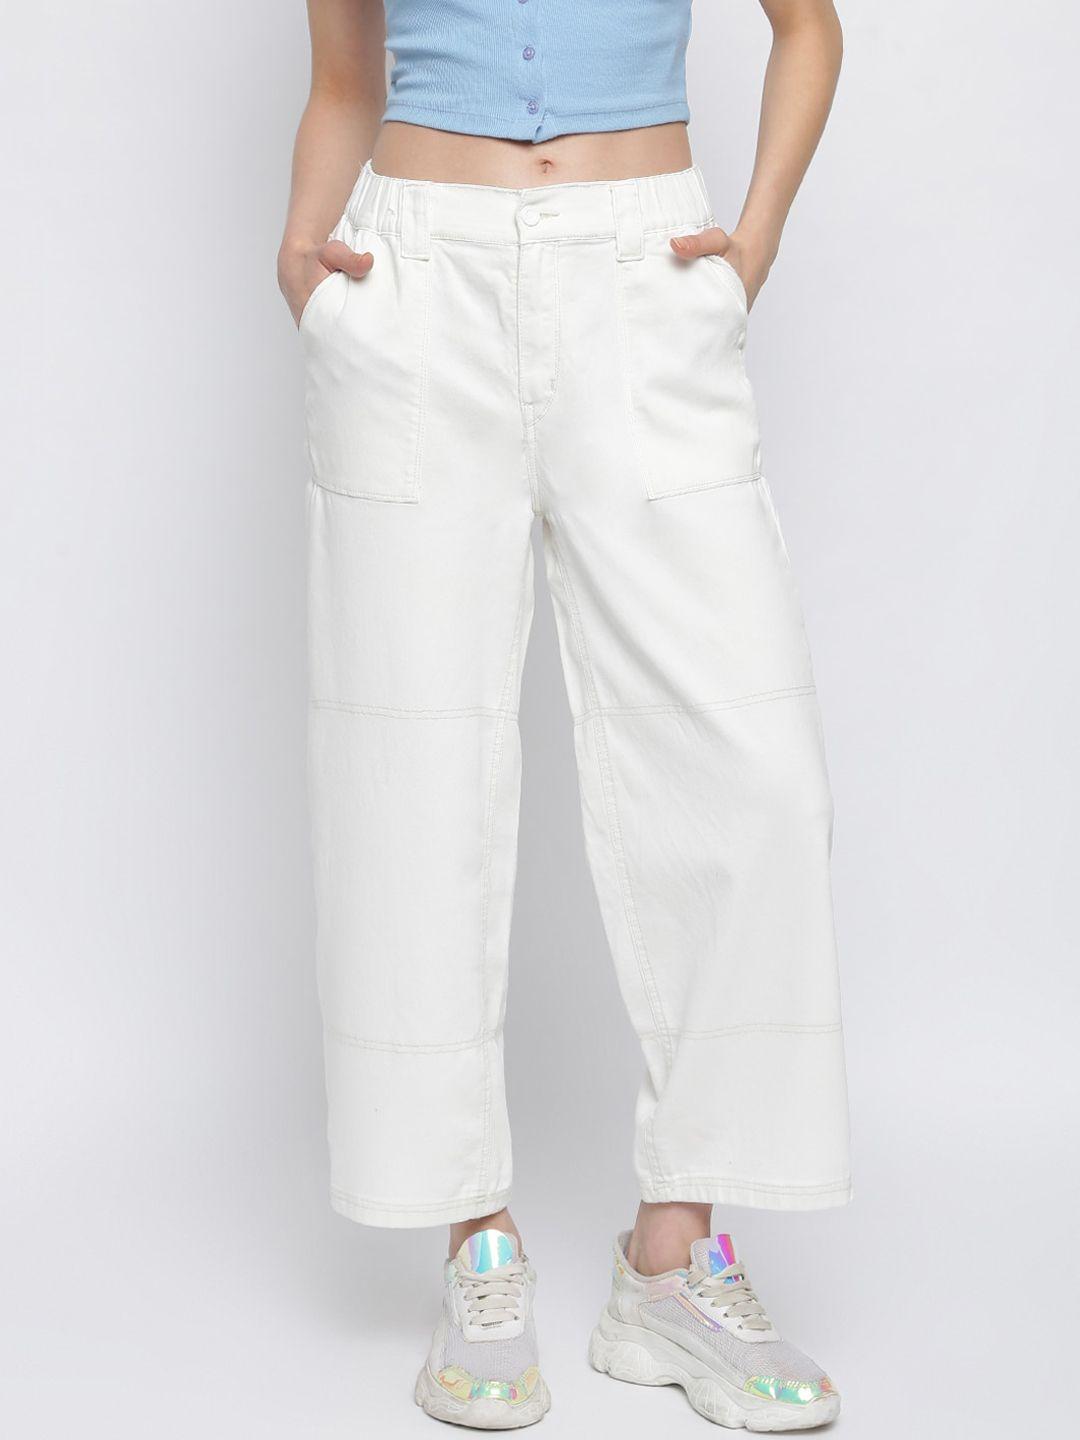 tales & stories women white mildly distressed stretchable jeans